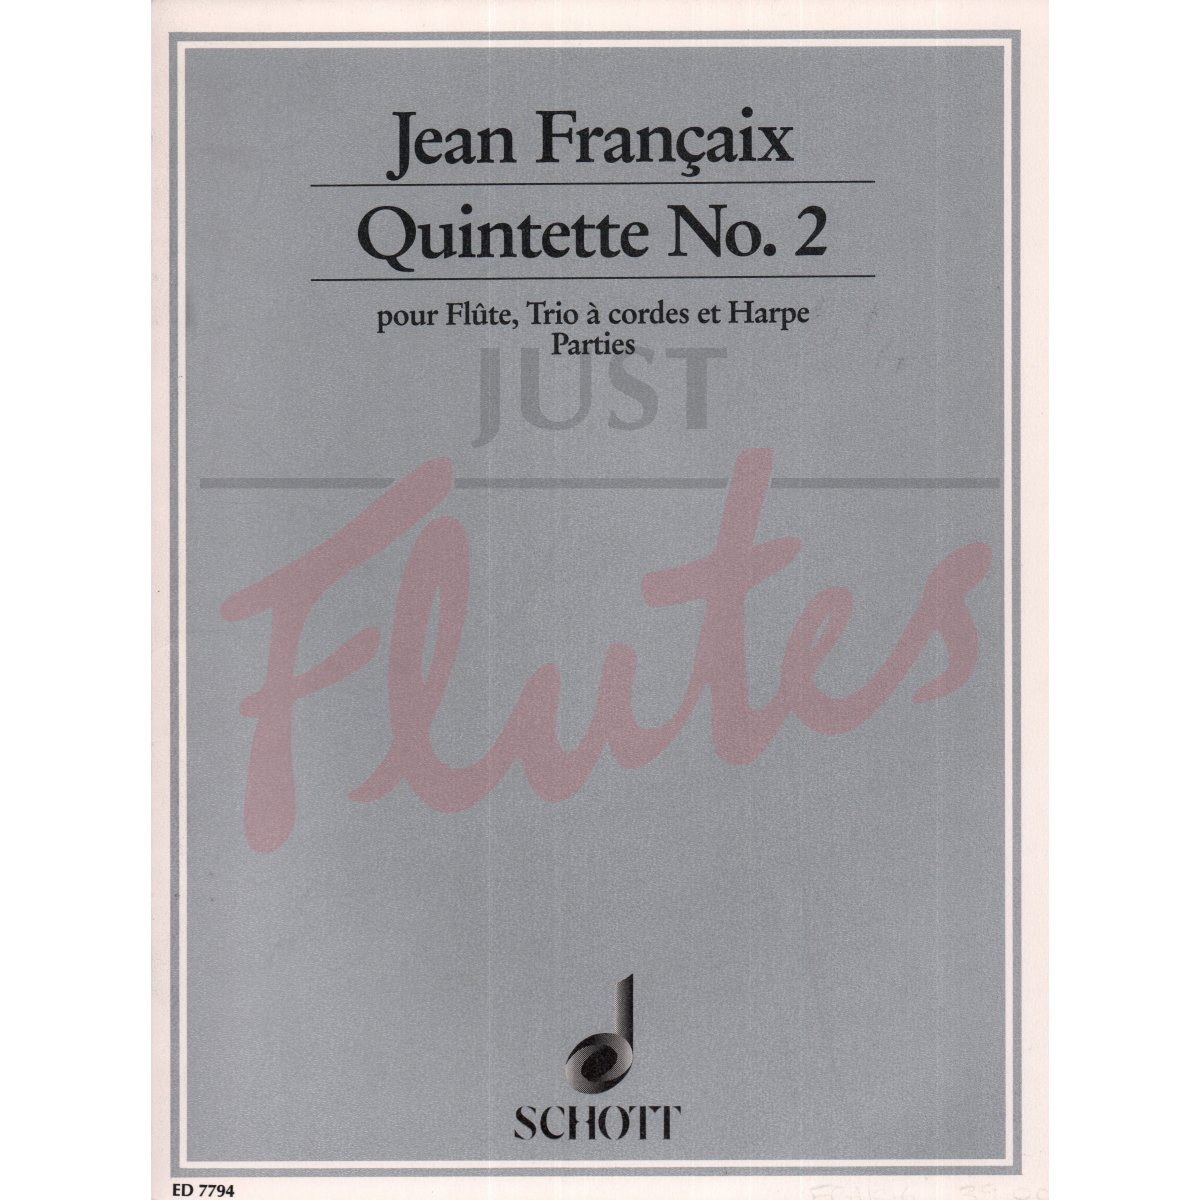 Quintet No 2 for Flute, Harp and String Trio